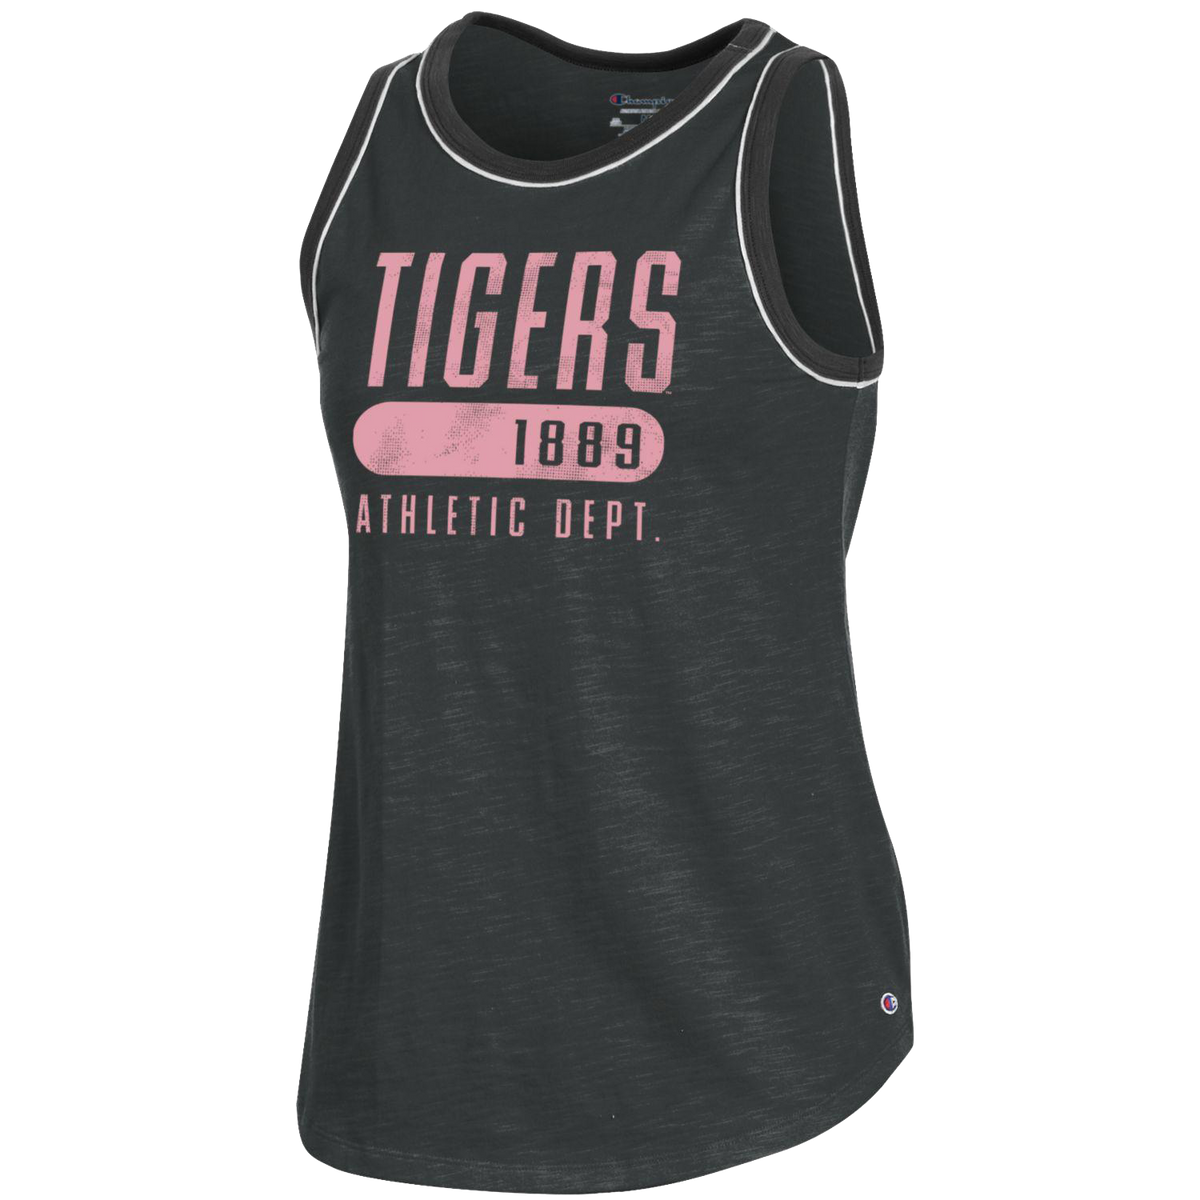 Champion Womens Tank - Tigers Over 1889 Ath Dept